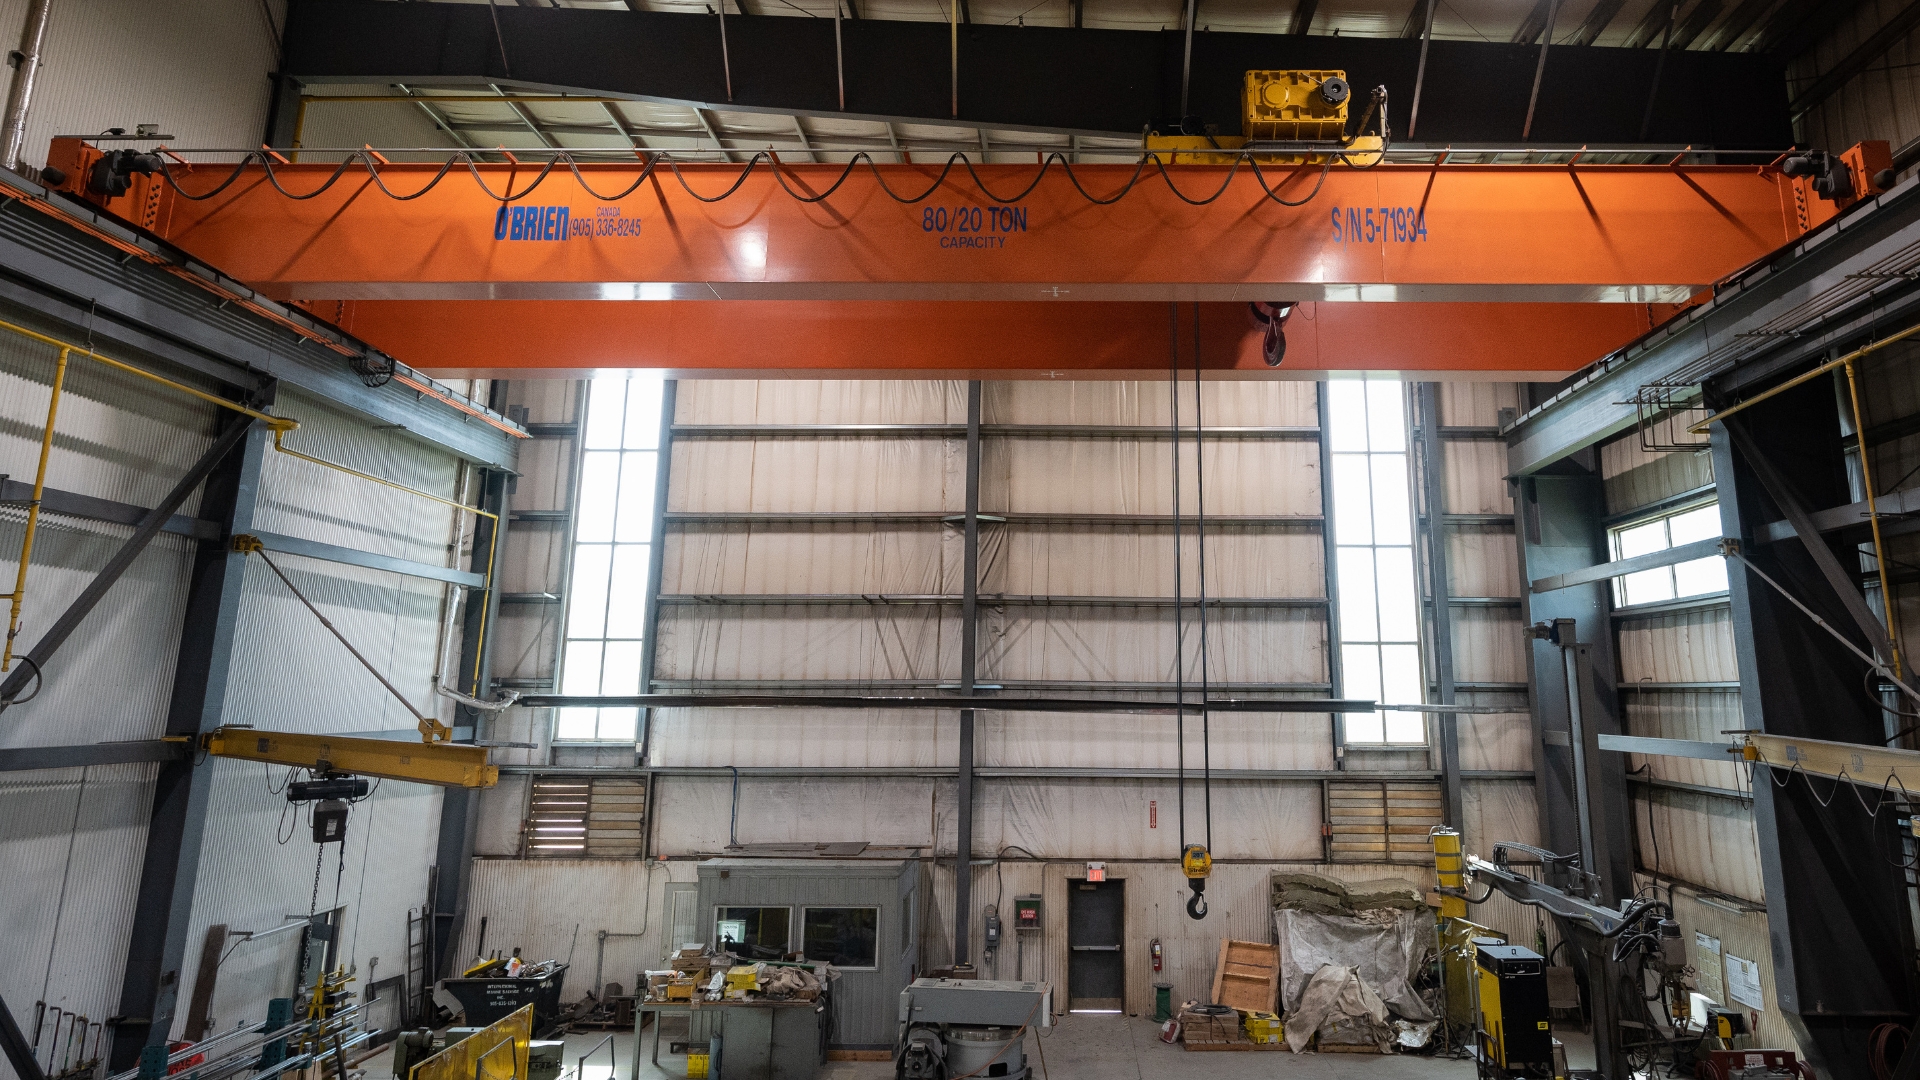 Overhead Crane Solutions – Do You Need to Upgrade or Replace Your Equipment?